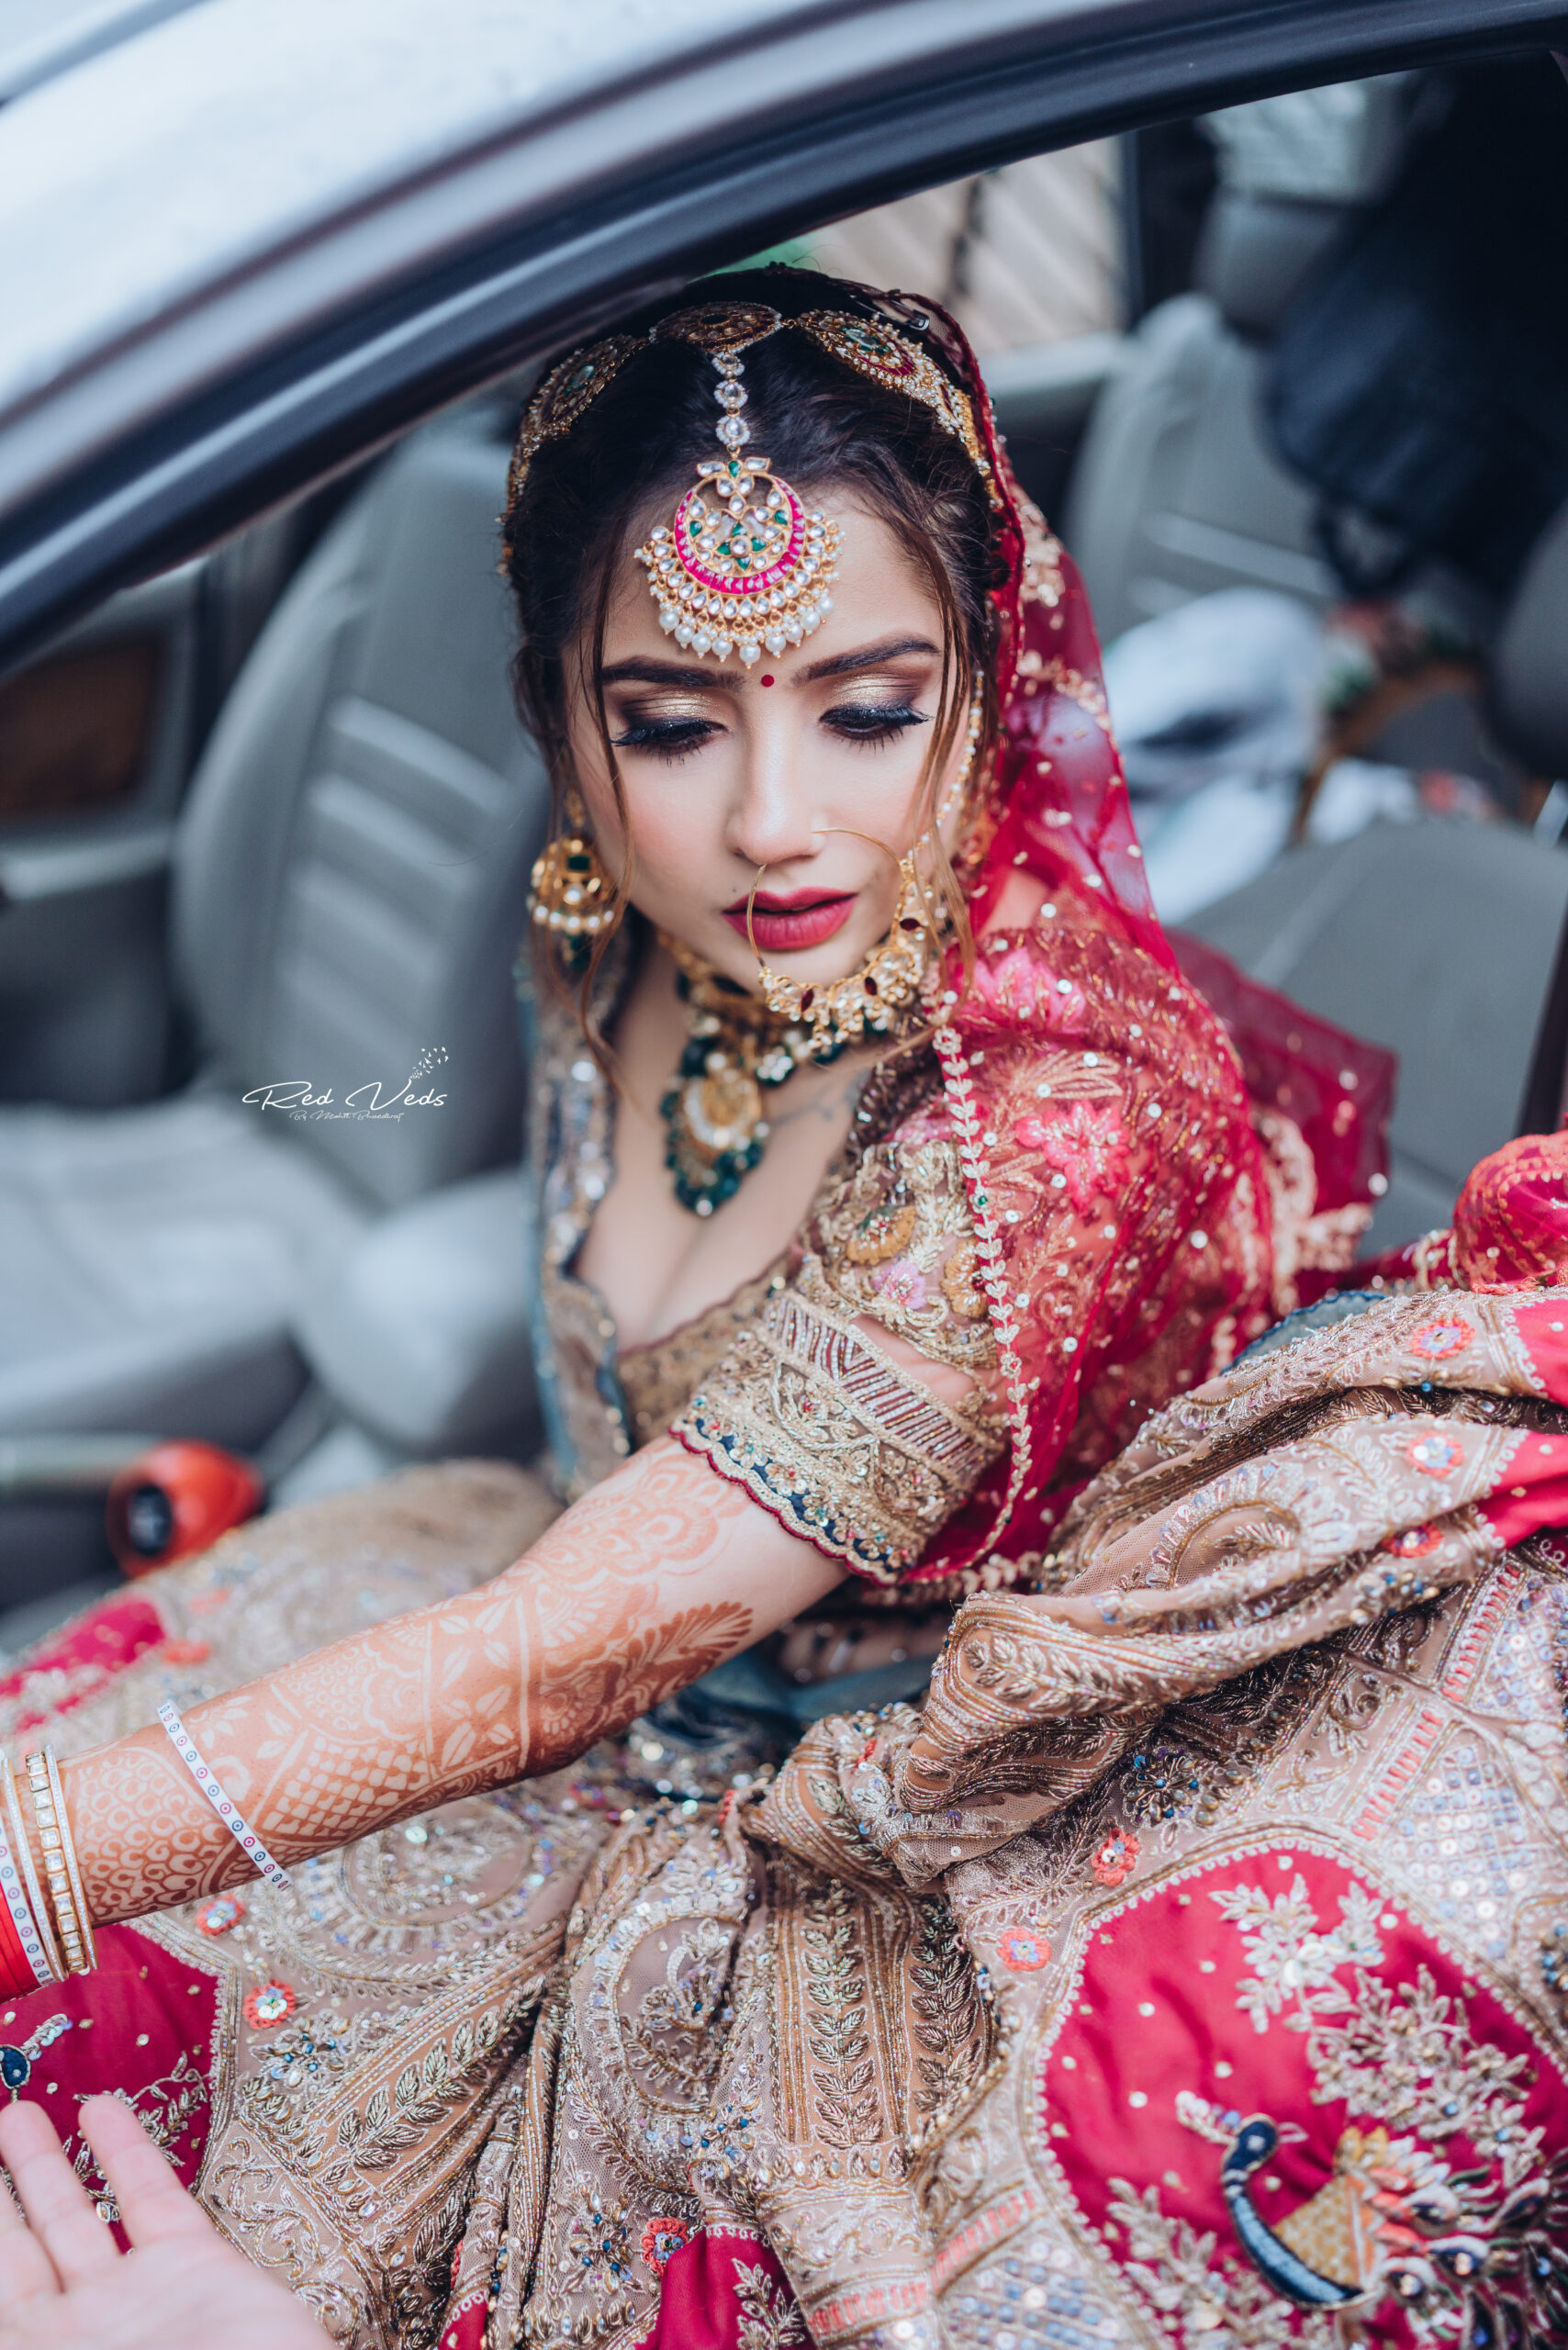 Pin by Sukhpreet Kaur 🌹💗💞💖💟🌹 on Bride | Photo poses for couples,  Indian bride photography poses, Bride photos poses